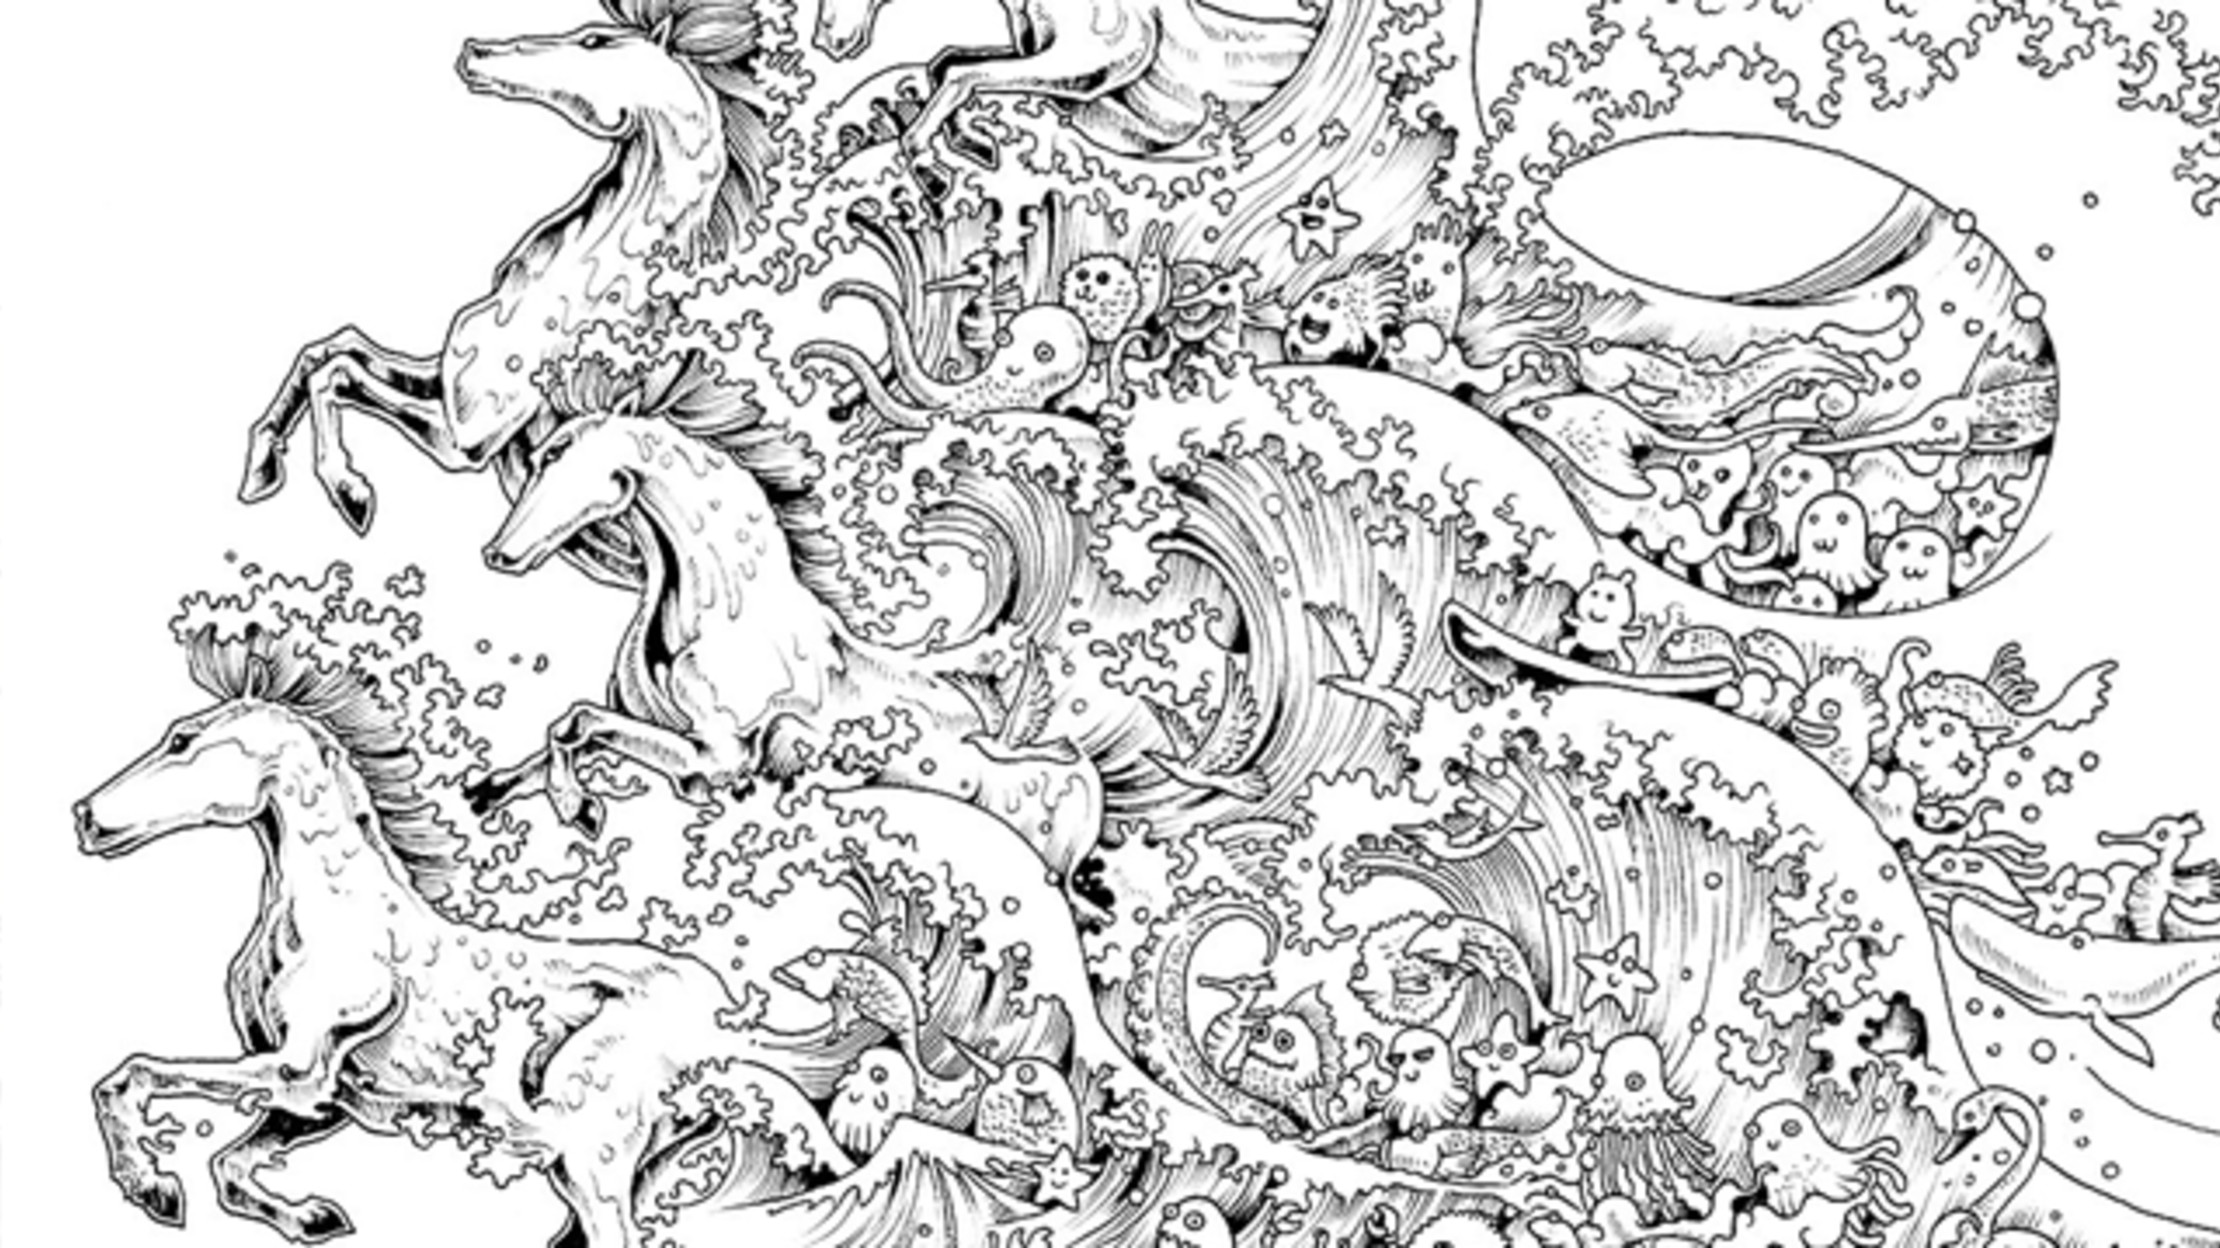 Coloring Sheet For Adults
 10 Intricate Adult Coloring Books to Help You De Stress